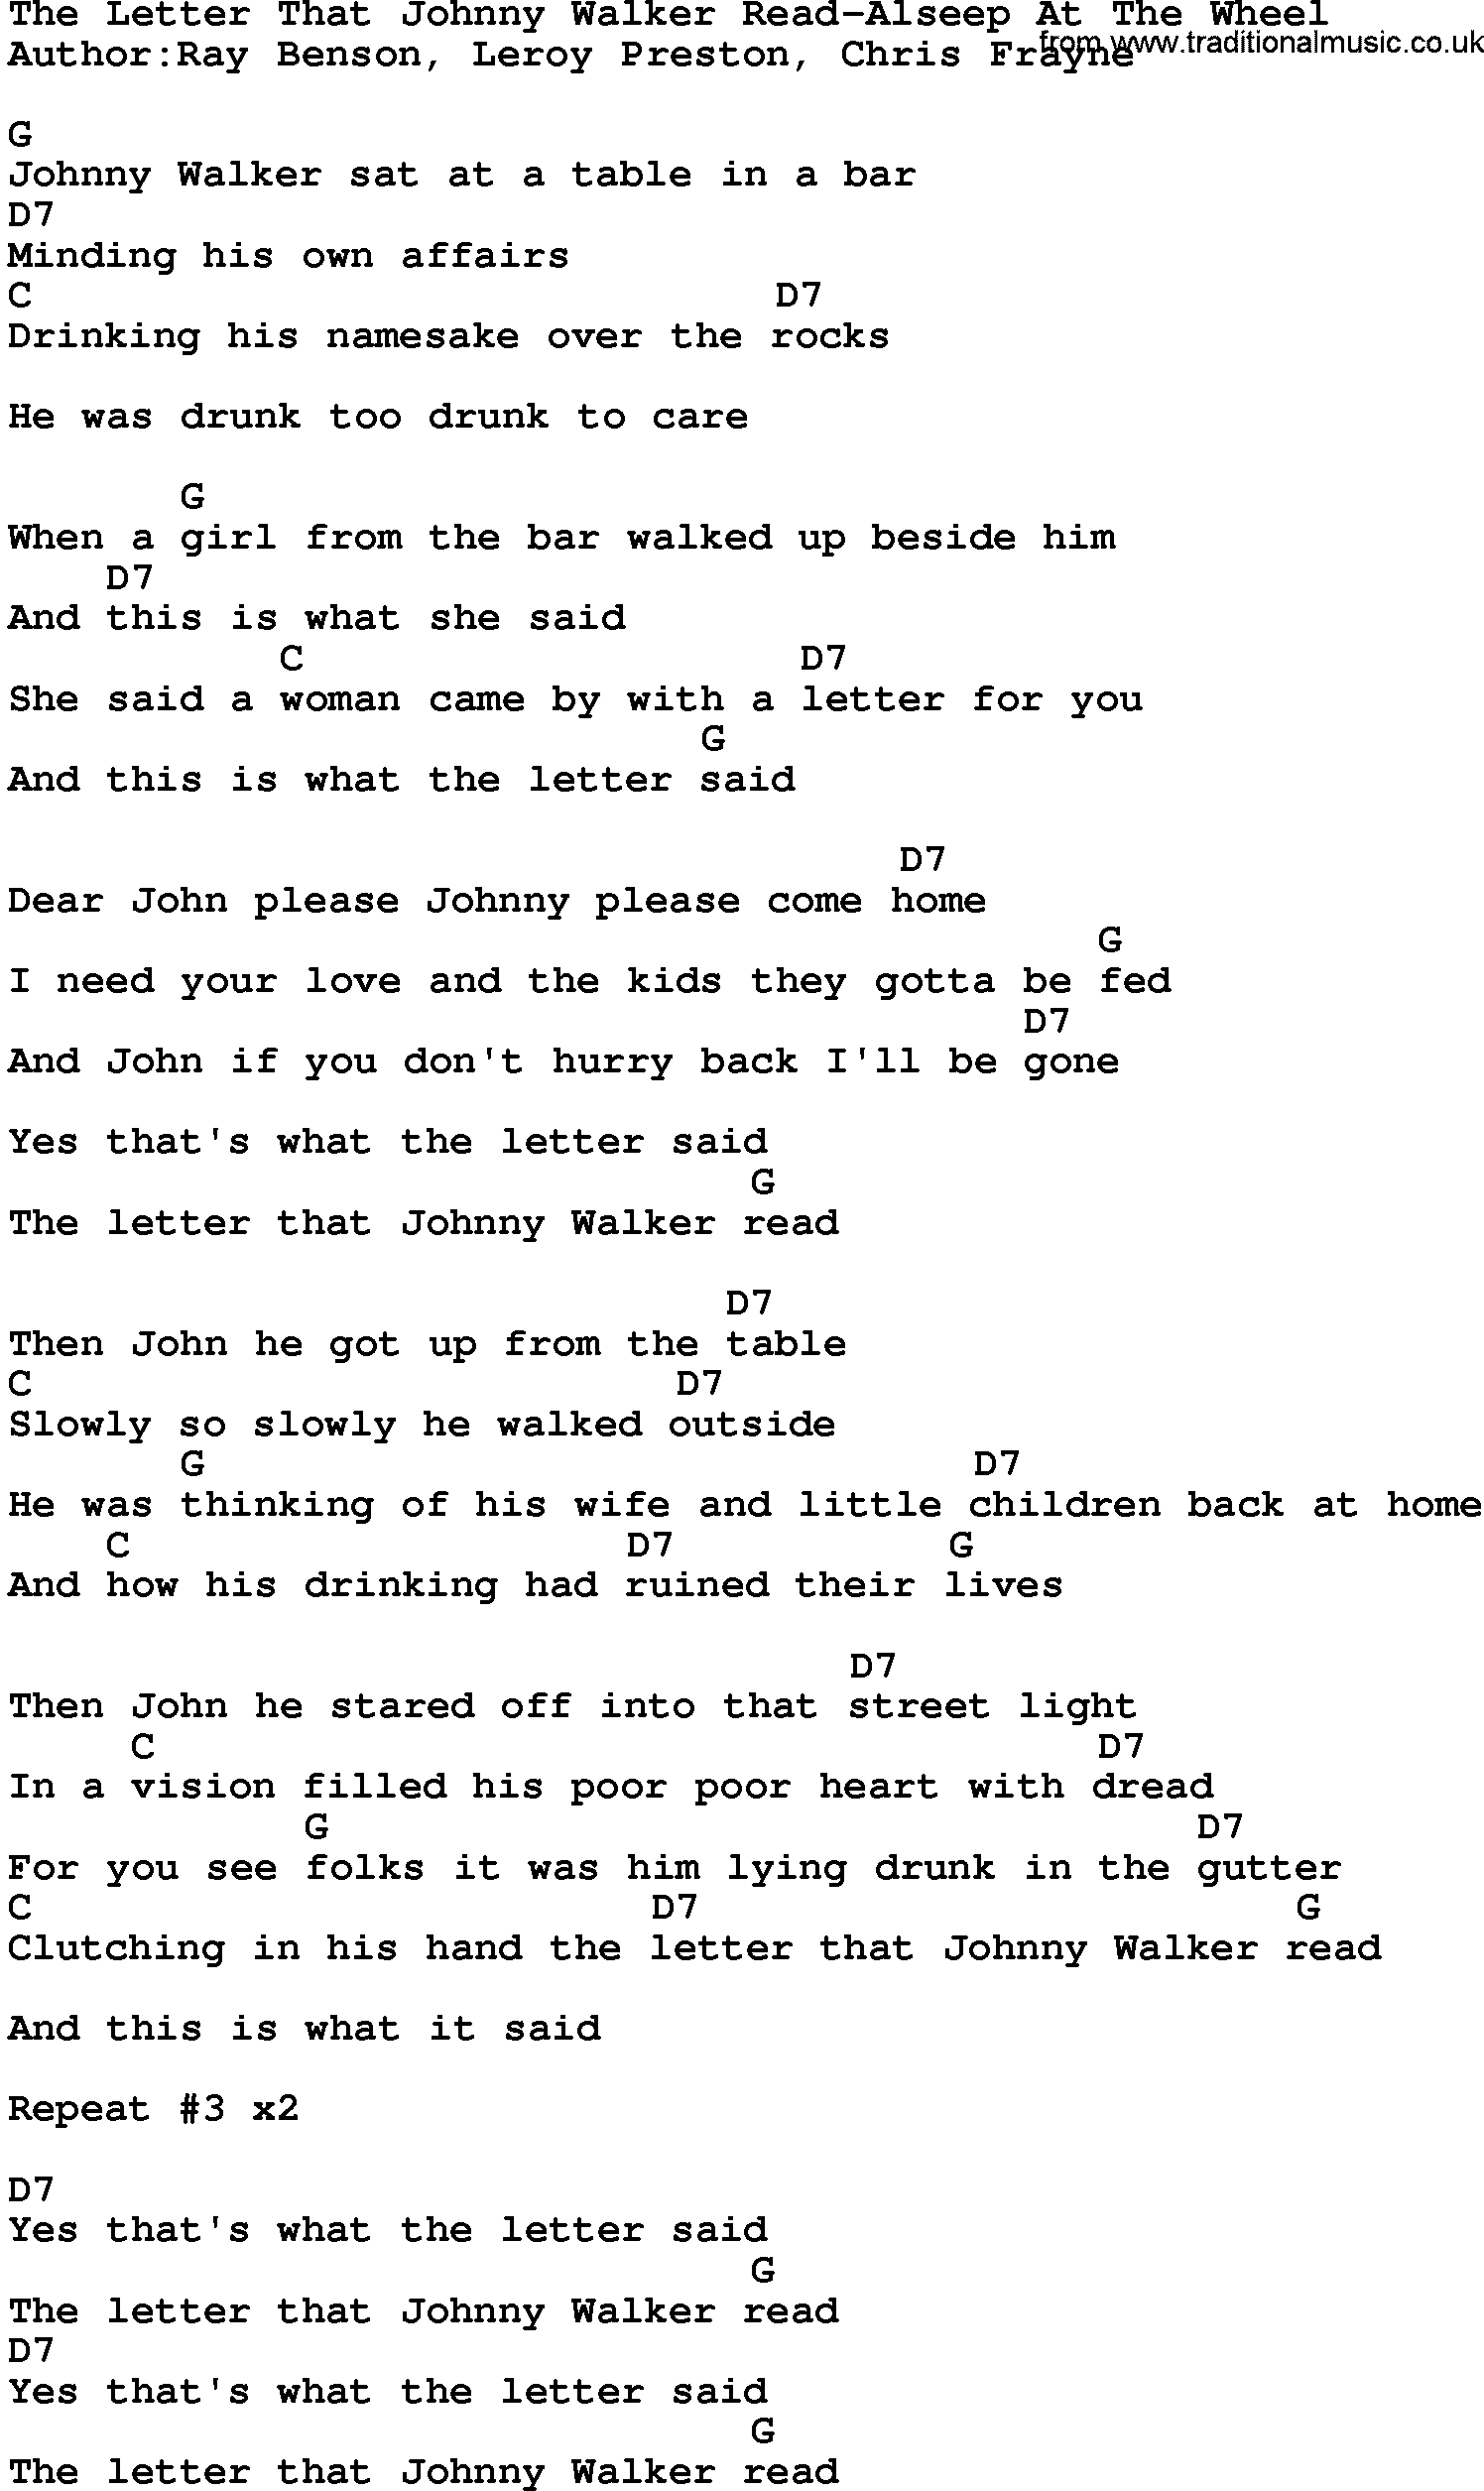 Country music song: The Letter That Johnny Walker Read-Alseep At The Wheel lyrics and chords